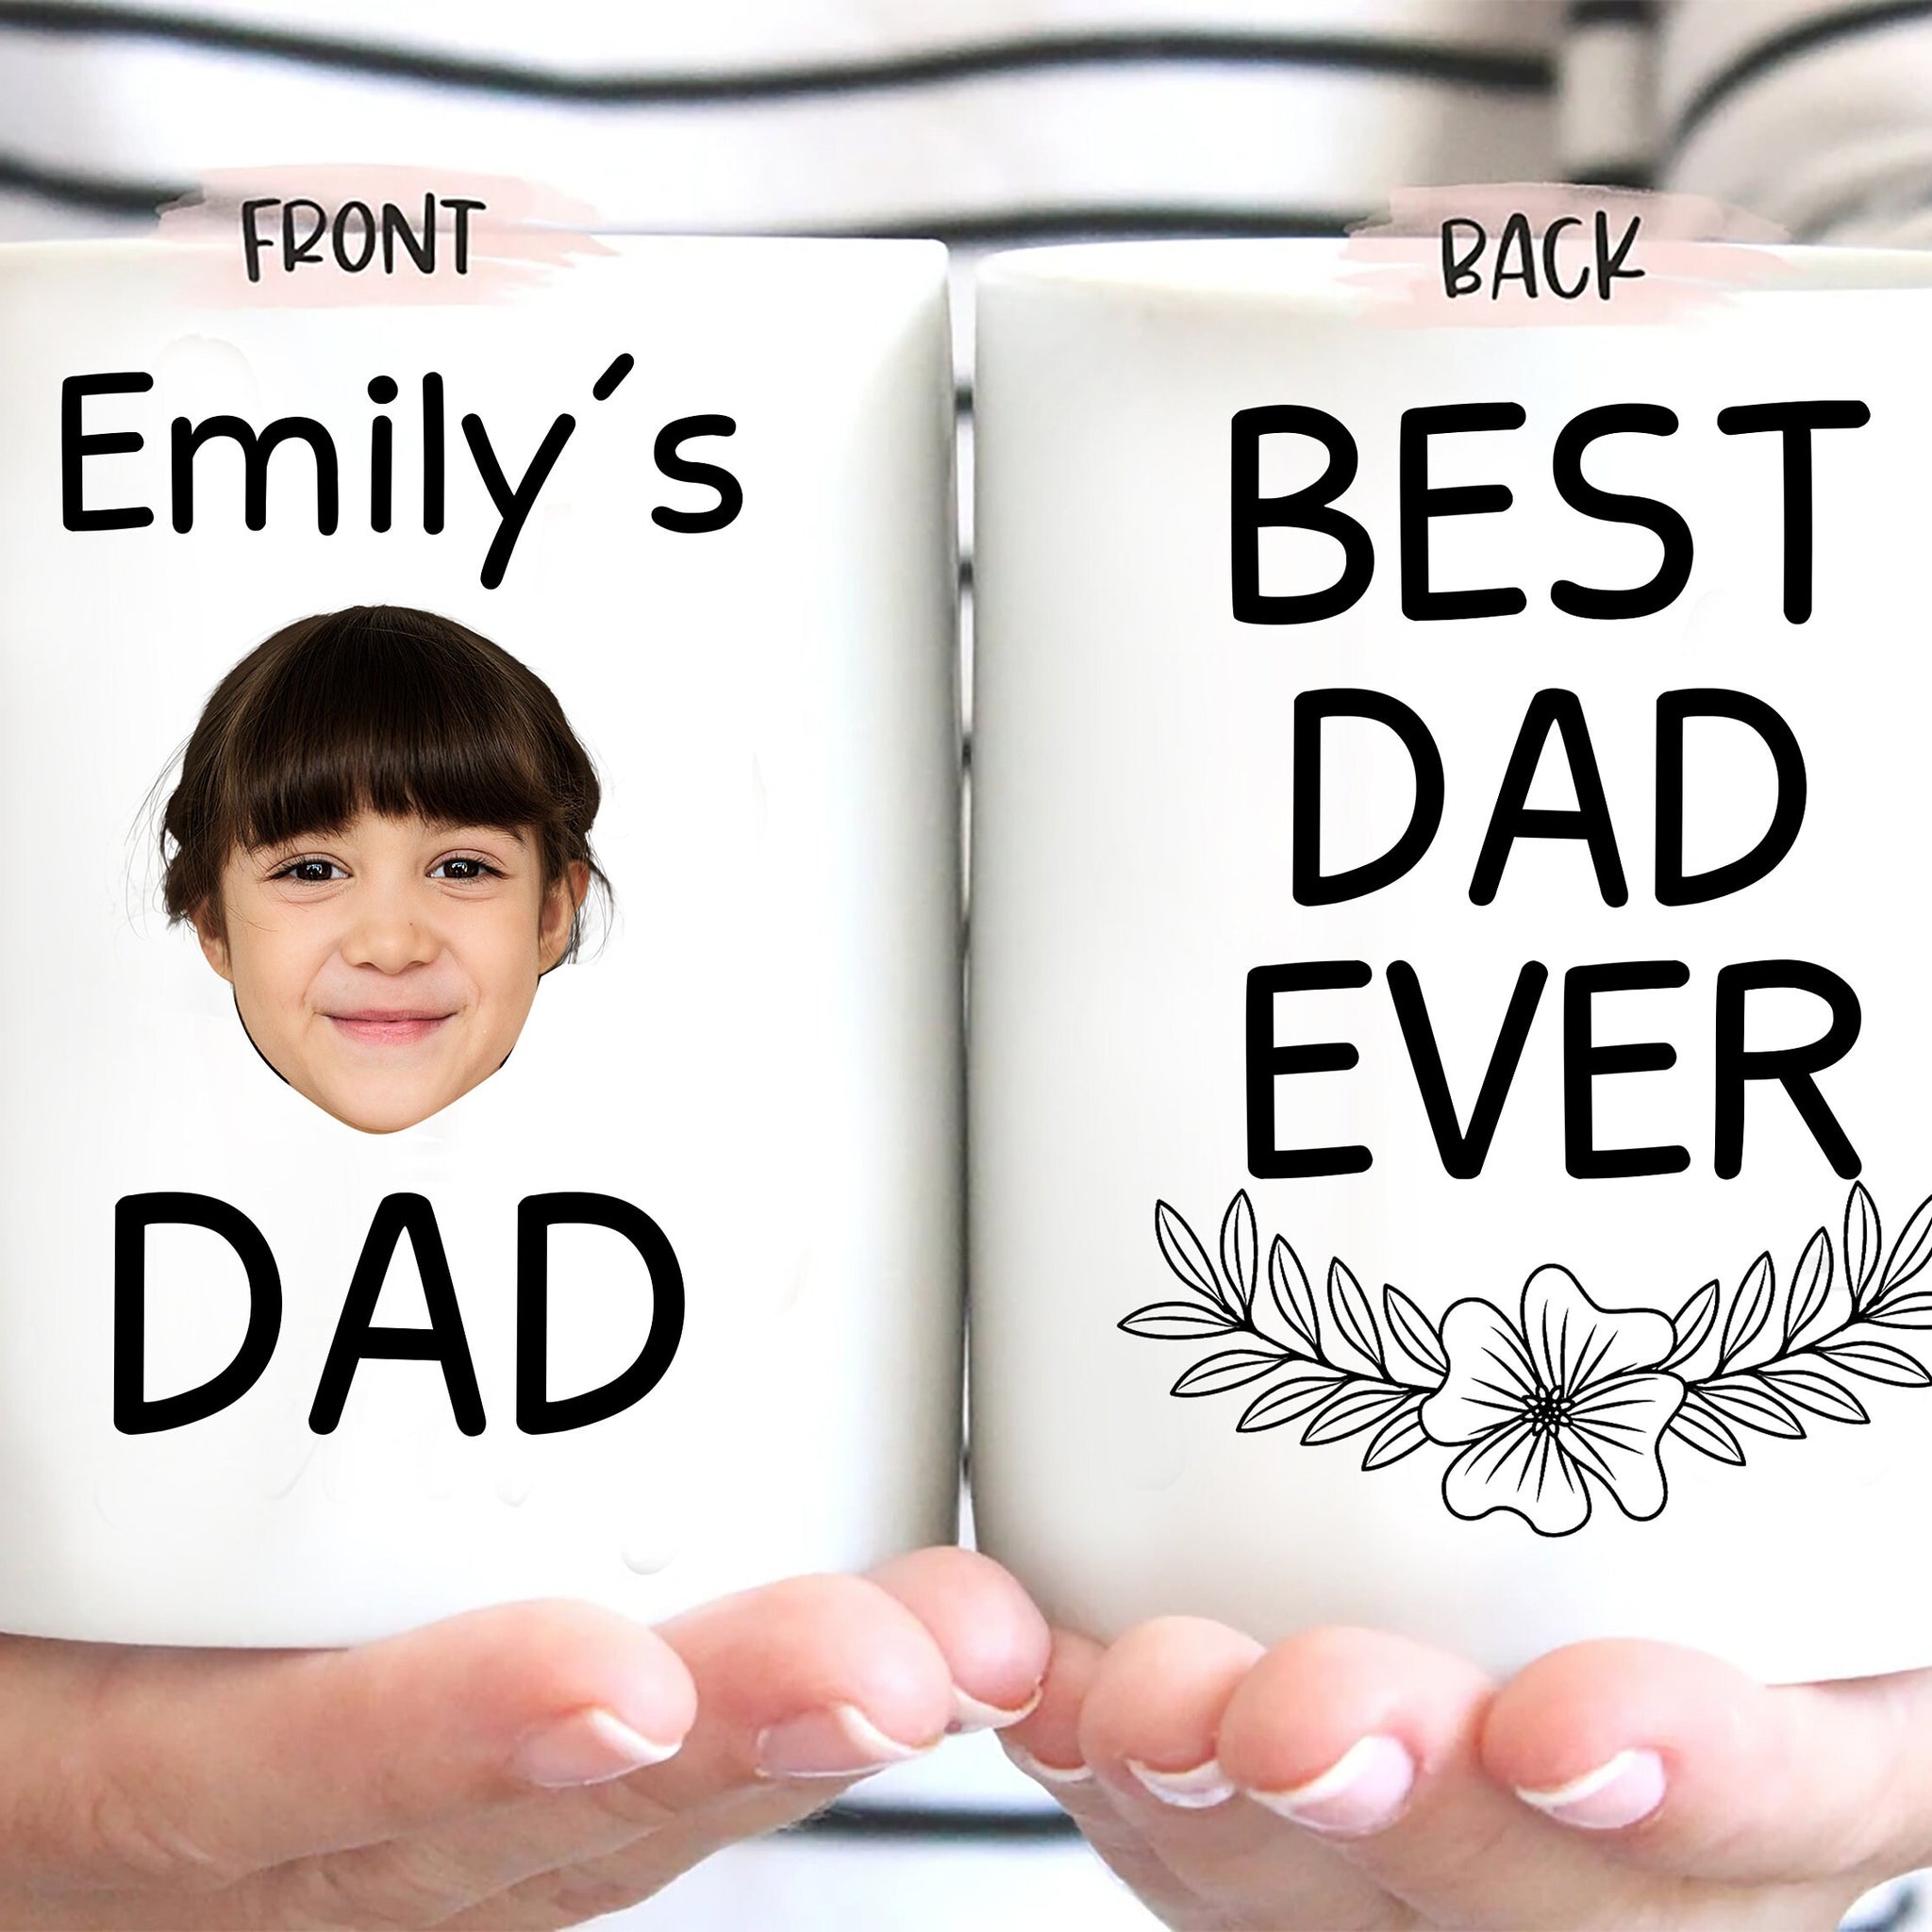 Personalized Photo of Kid Mug, Best Dad Ever Mug, Baby Face Coffee Mug, Custom Kid Picture Coffee Cup, Gift for Dad, Father's Day Gift